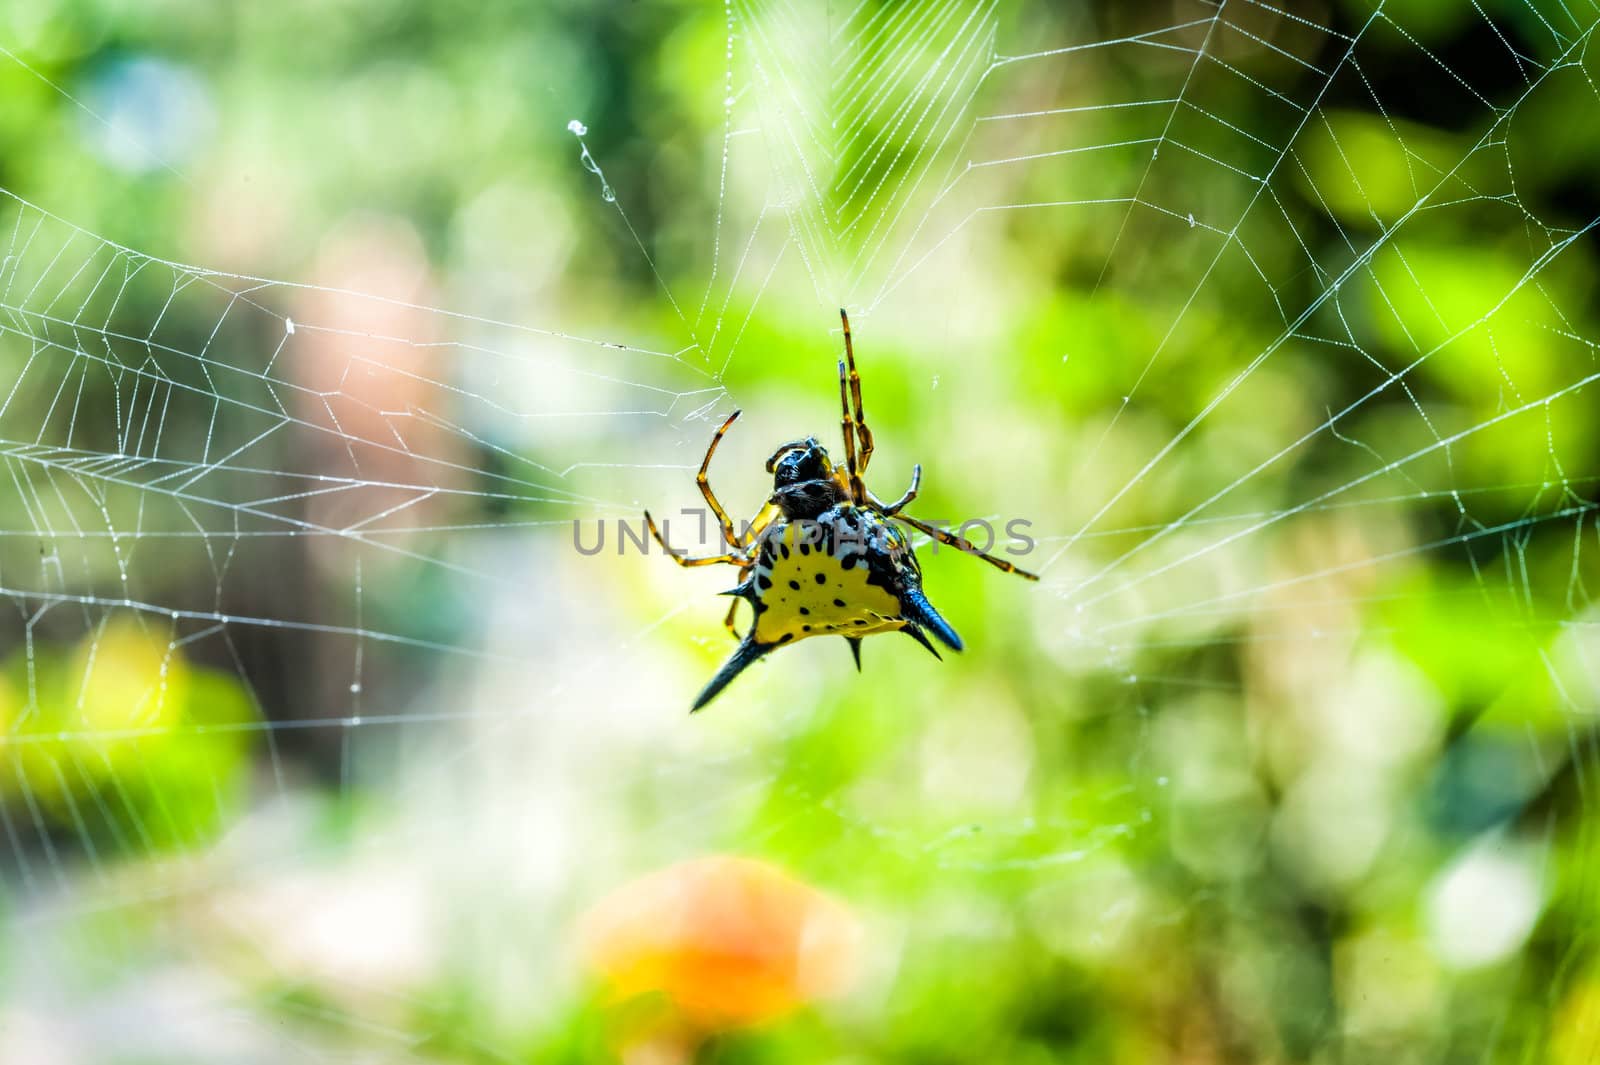 Hasselt's Spiny Spider on cobweb by moggara12